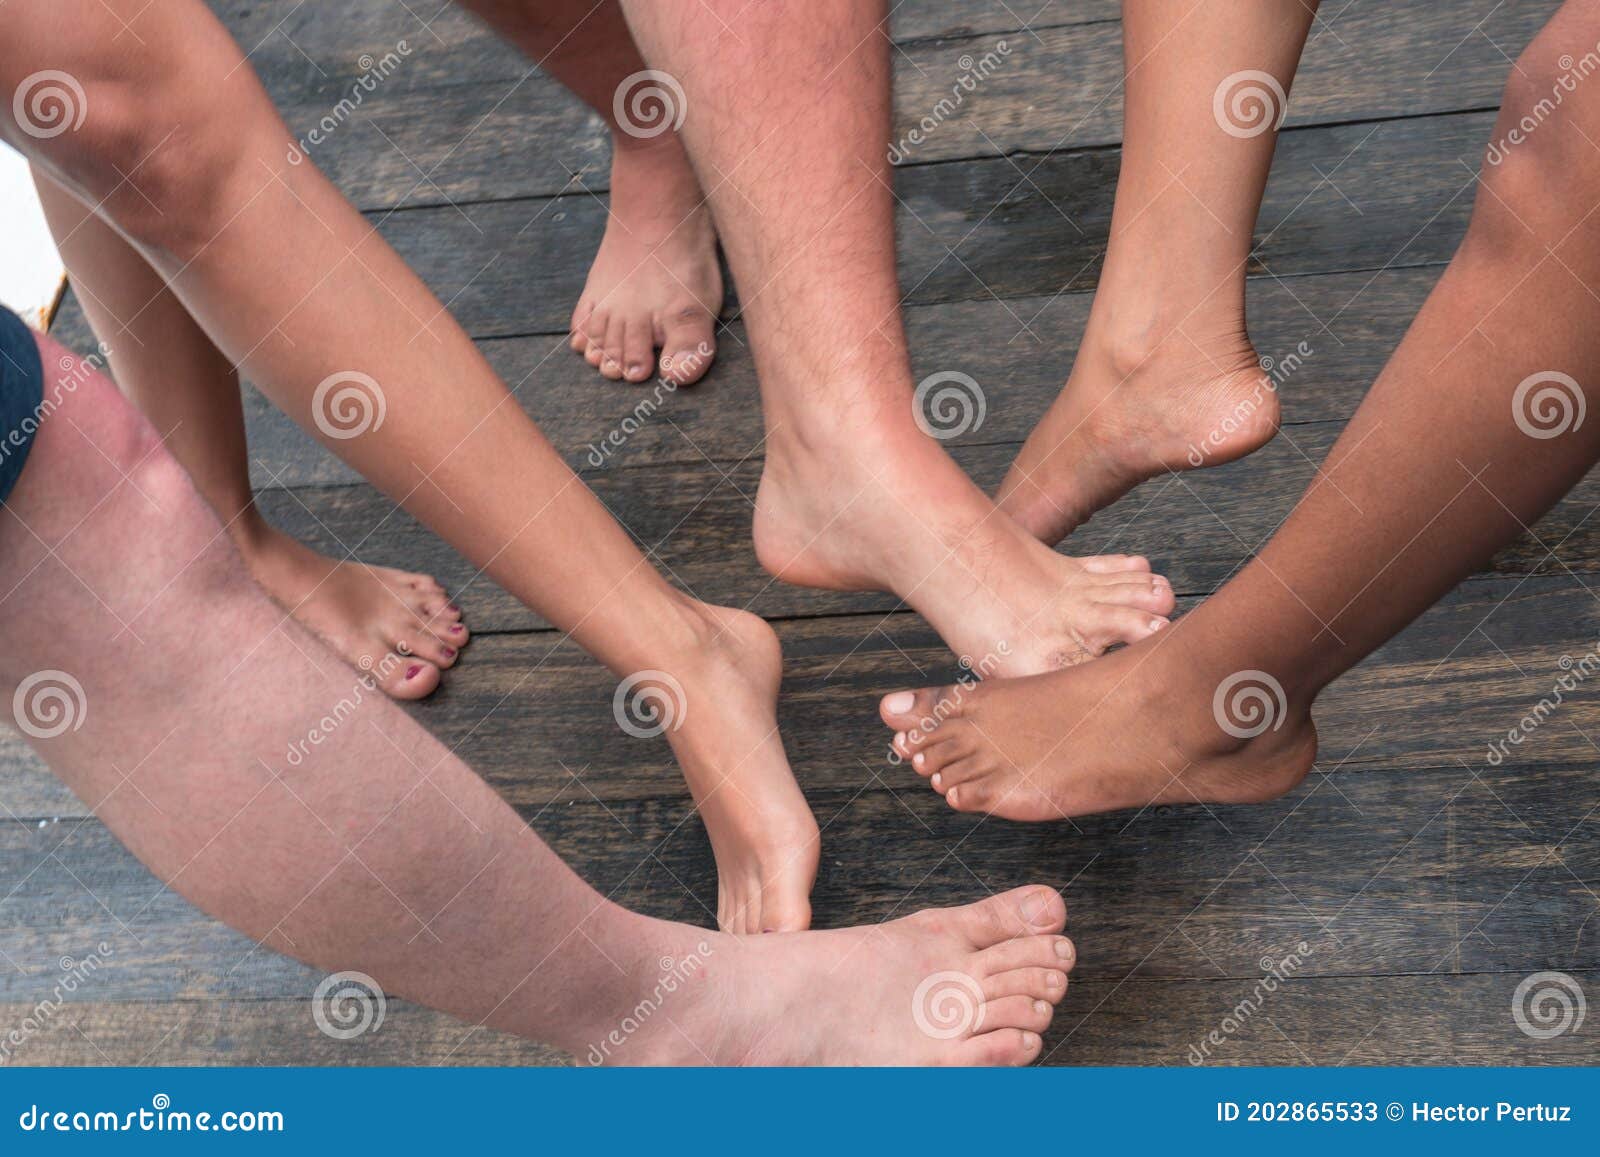 Groups Of Unrecognizable Friends Greeting Each Other With Their Feet Stock Image Image Of